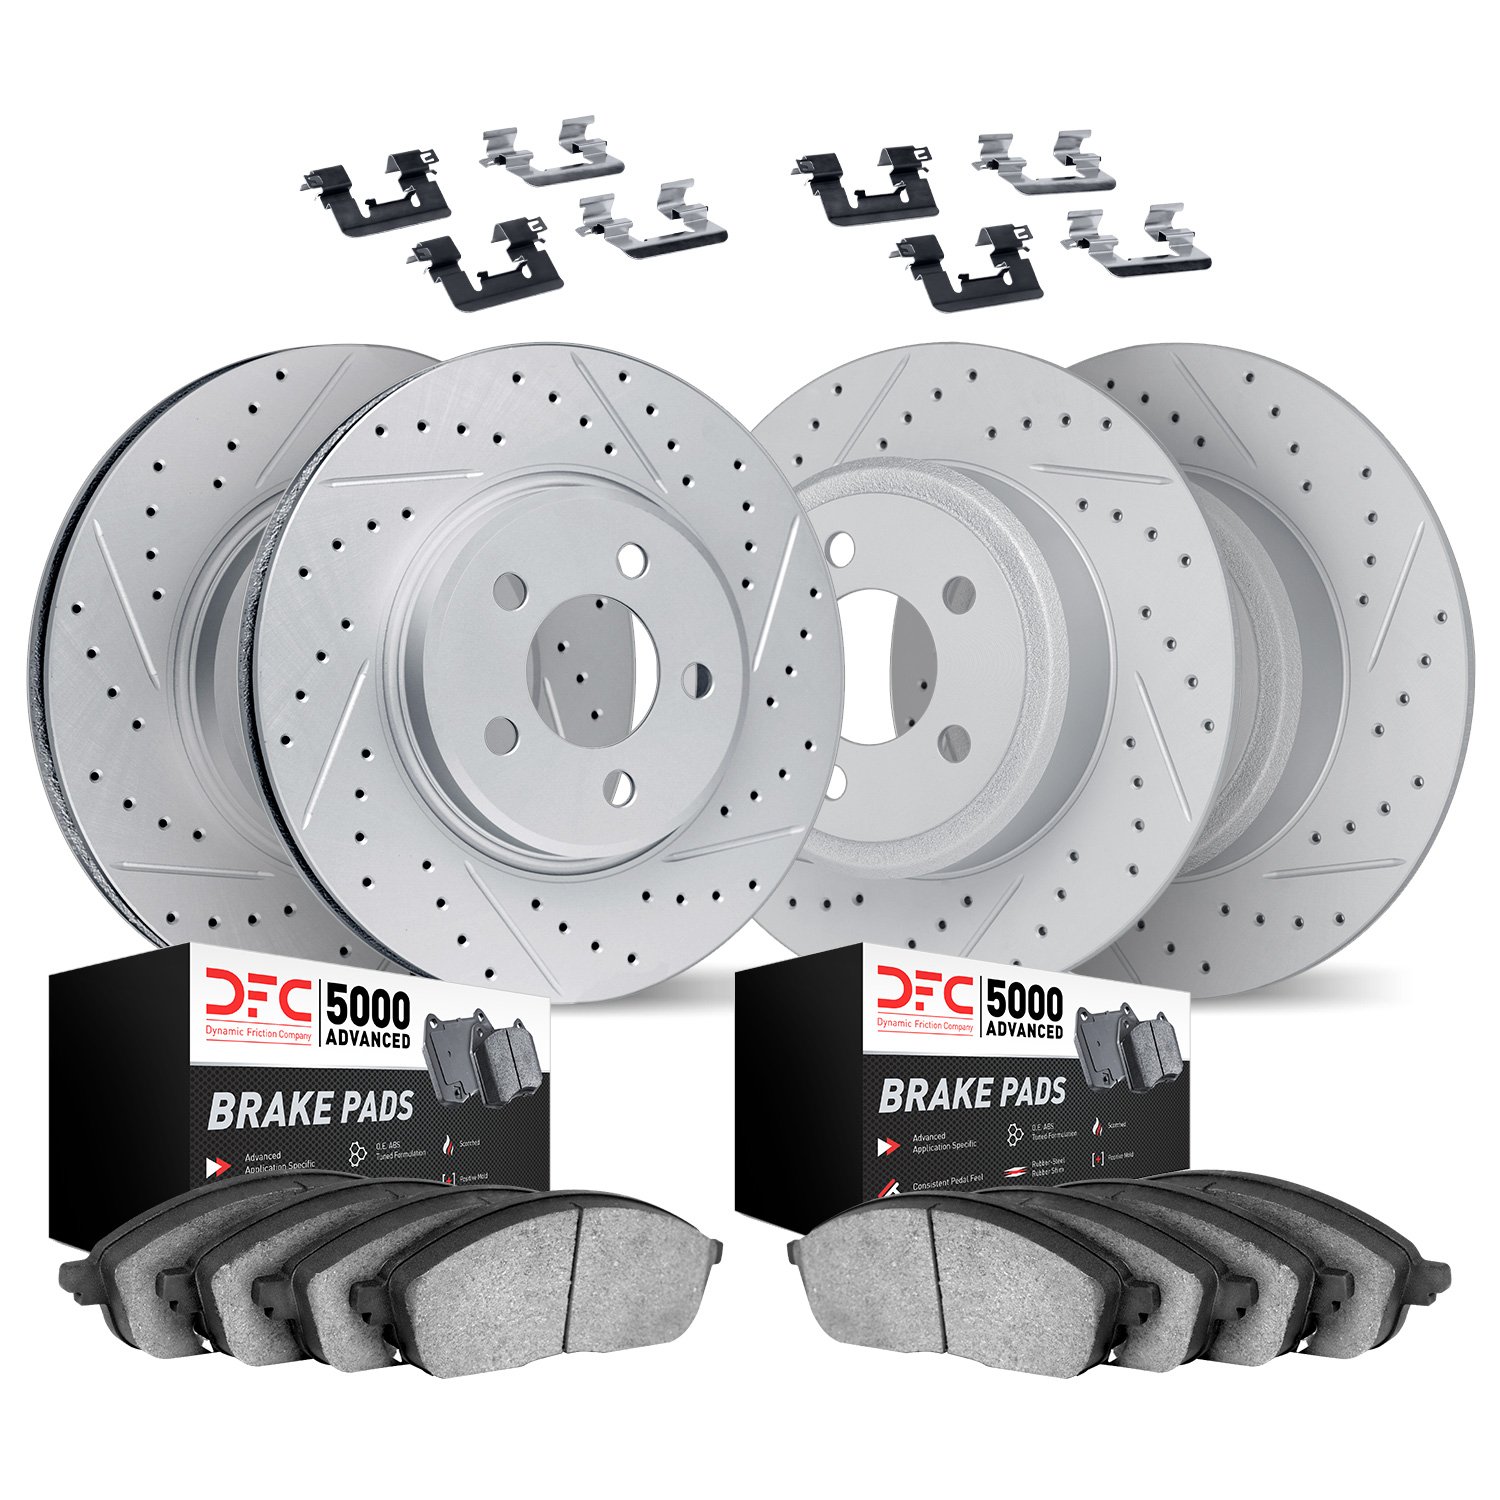 2514-32008 Geoperformance Drilled/Slotted Rotors w/5000 Advanced Brake Pads Kit & Hardware, 2013-2016 Mini, Position: Front and